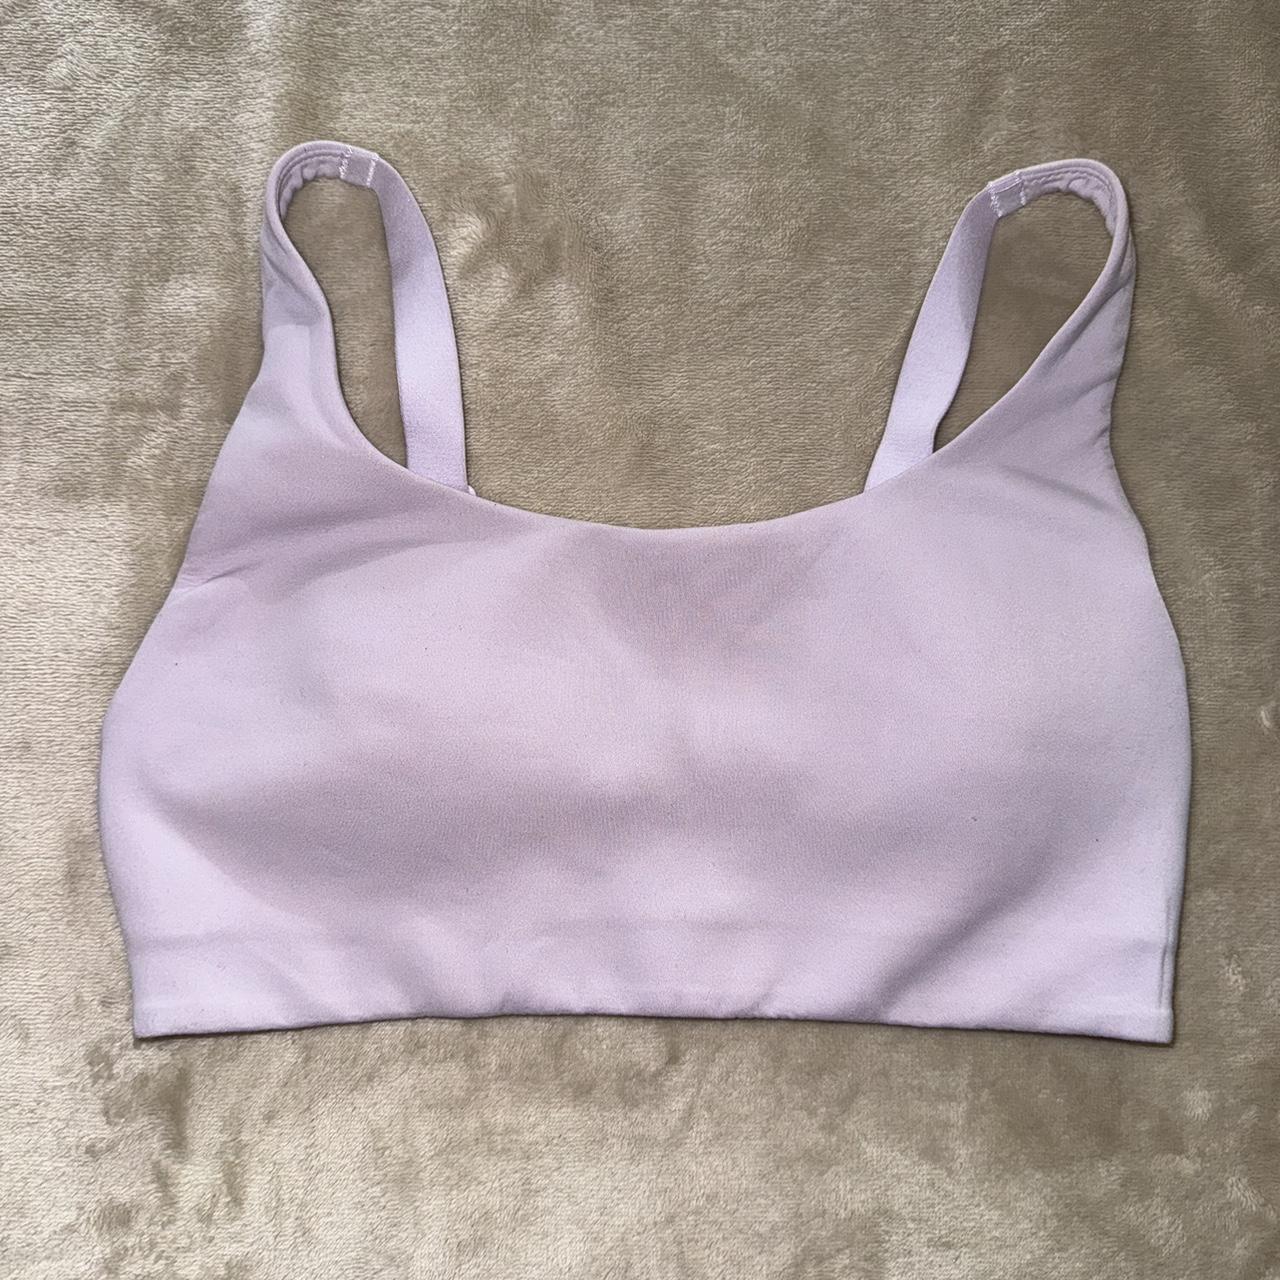 Very cute blue and white sports bra bought from tk - Depop